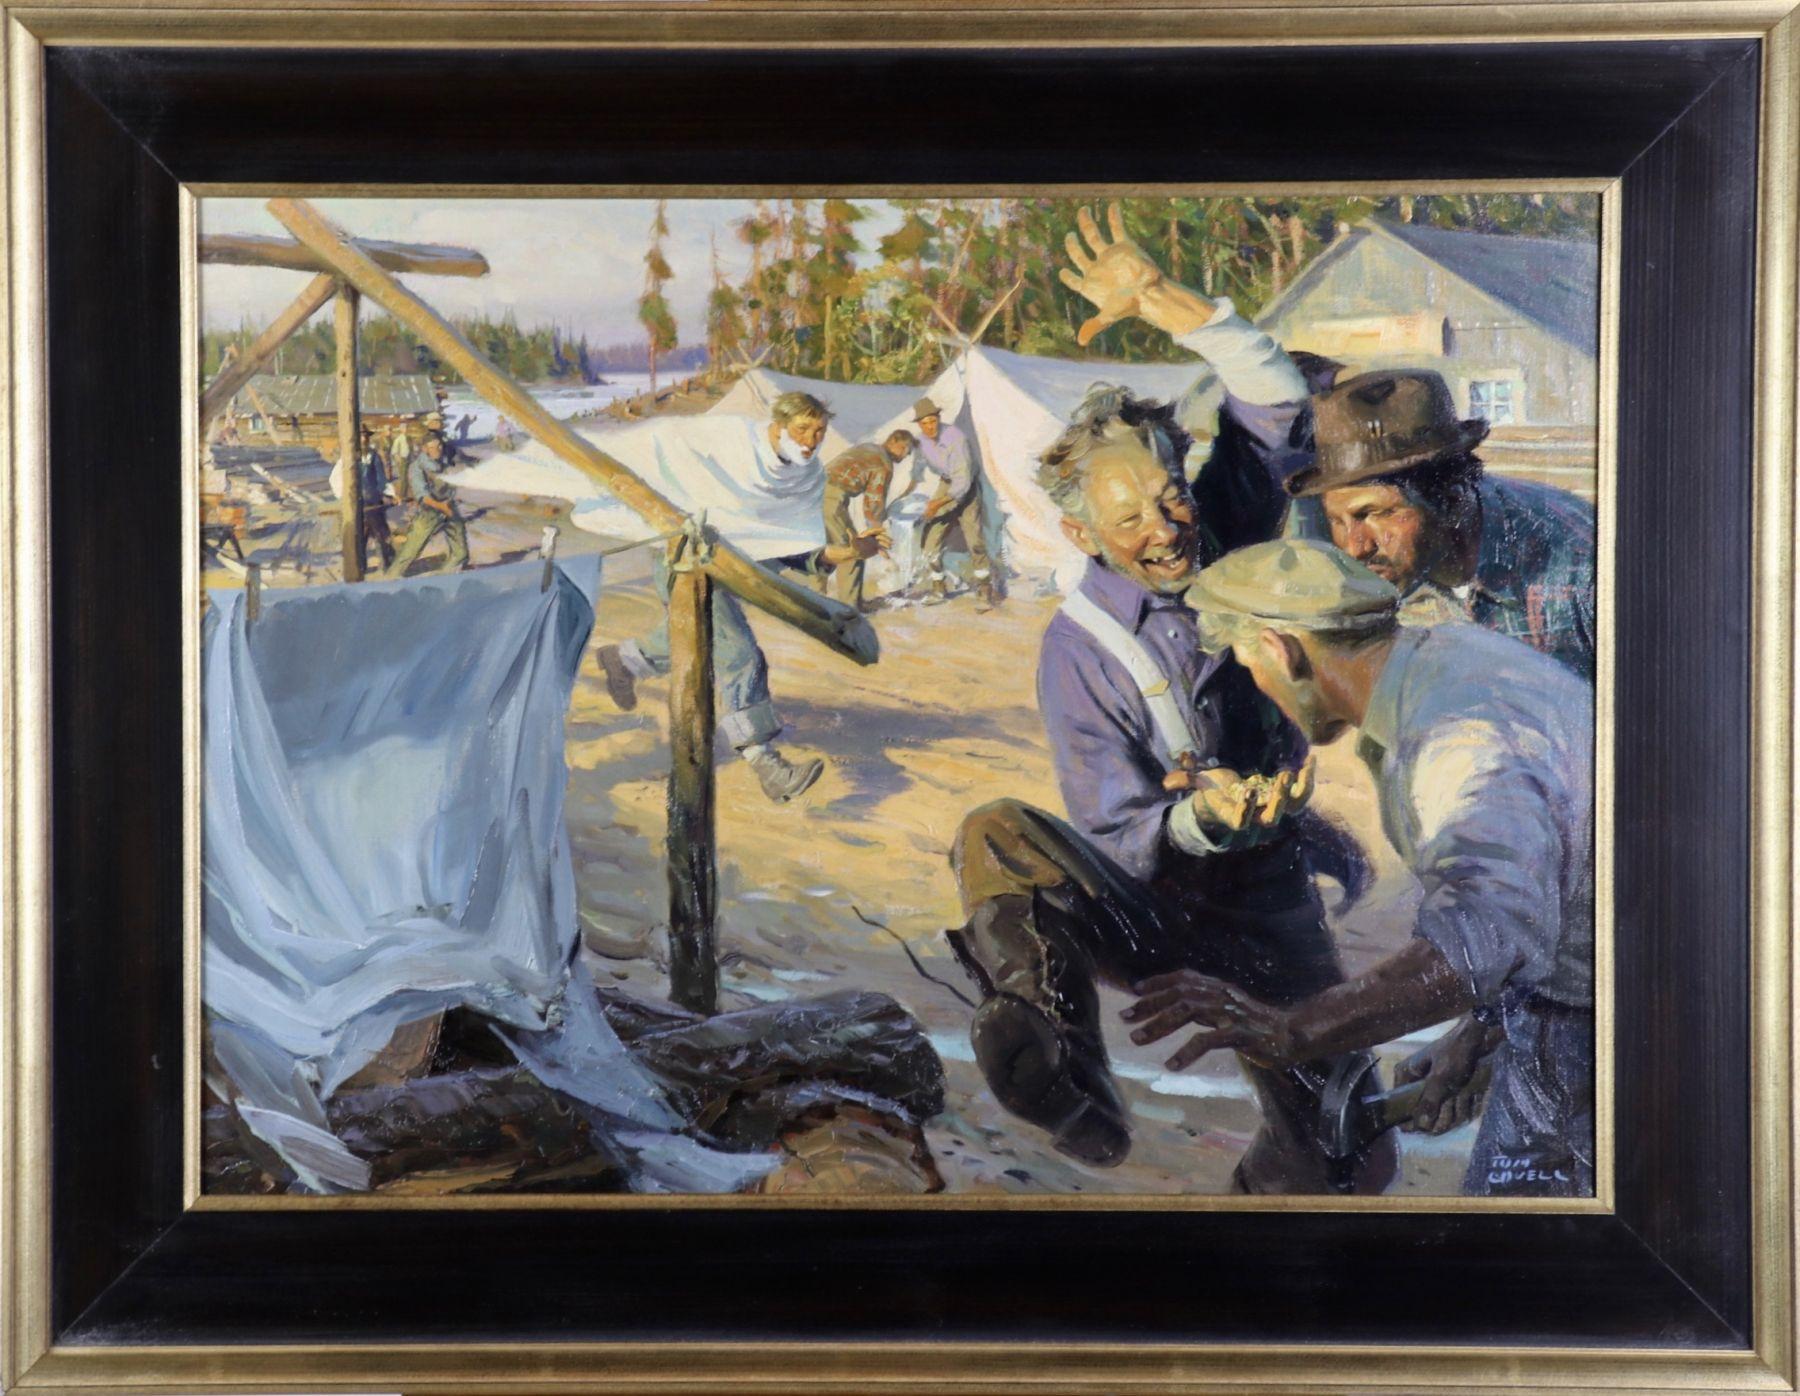 Camp d'extraction d'or - Painting de Tom Lovell